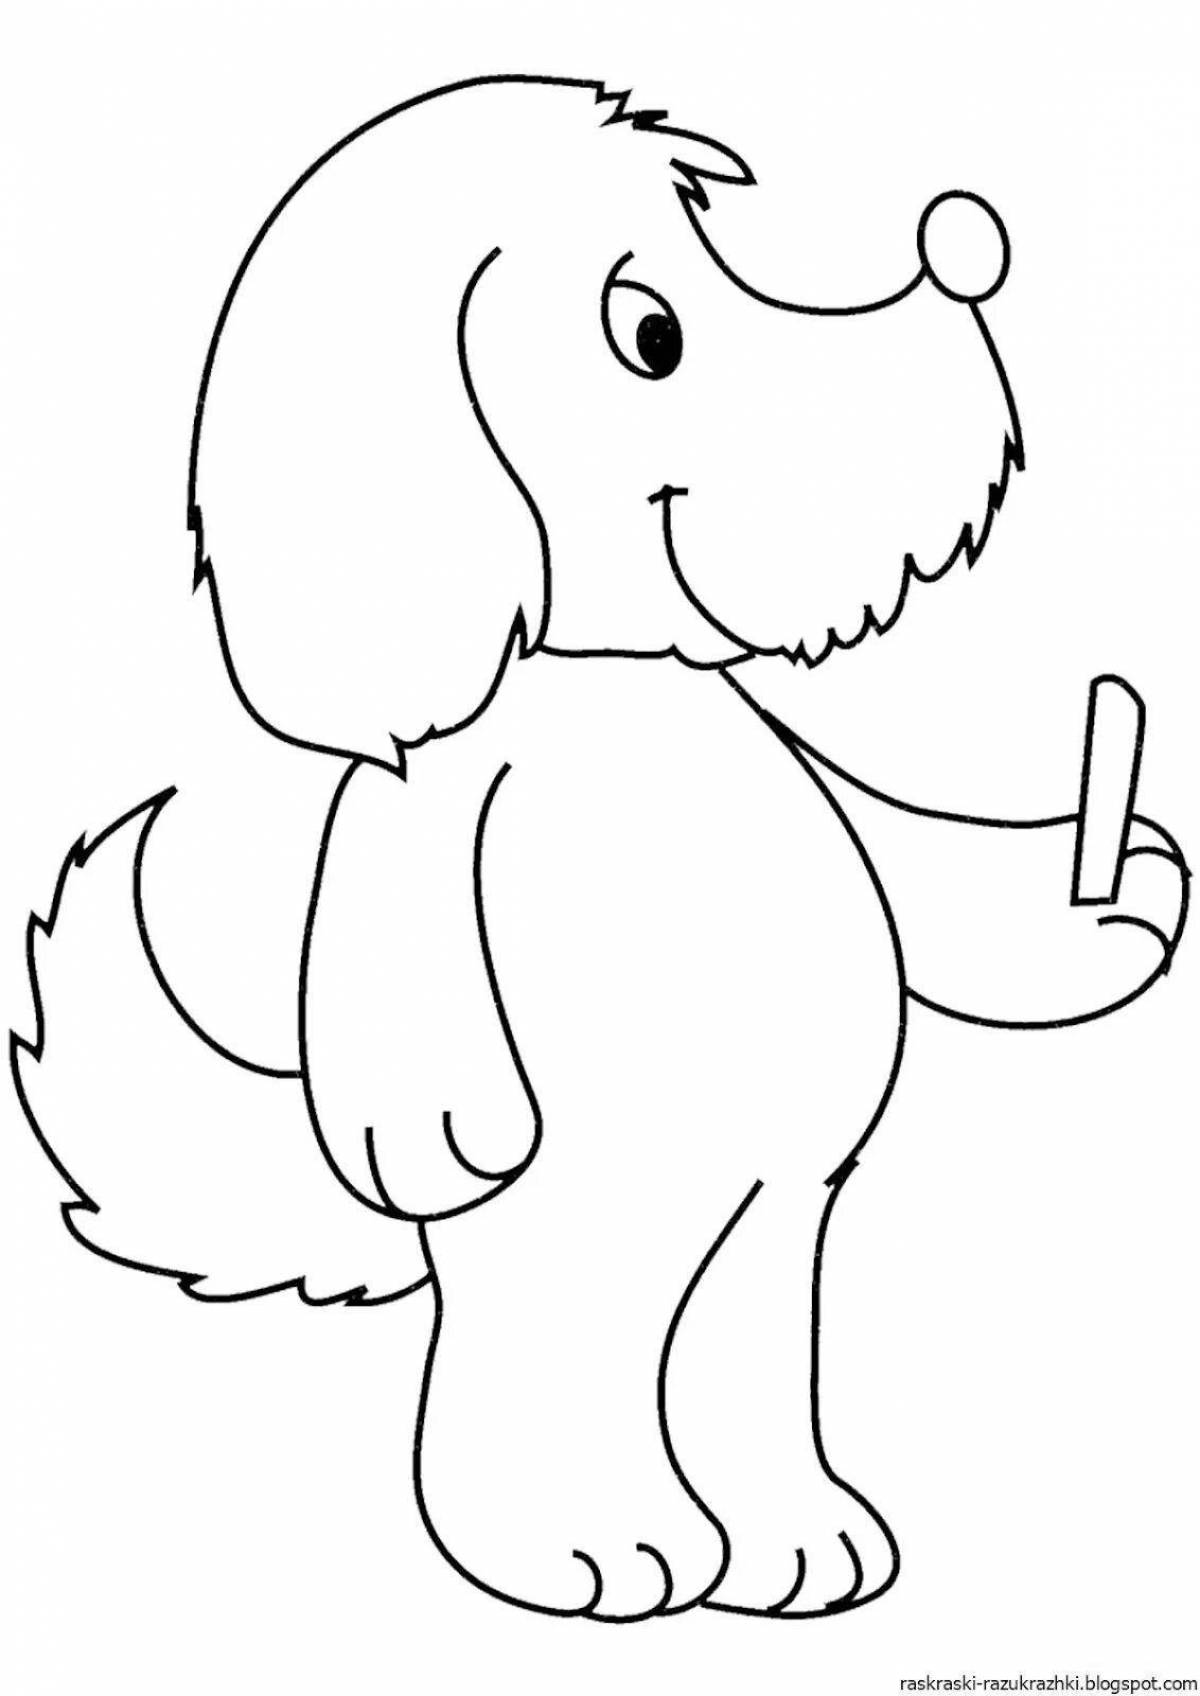 Entertaining dog coloring book for children 2-3 years old